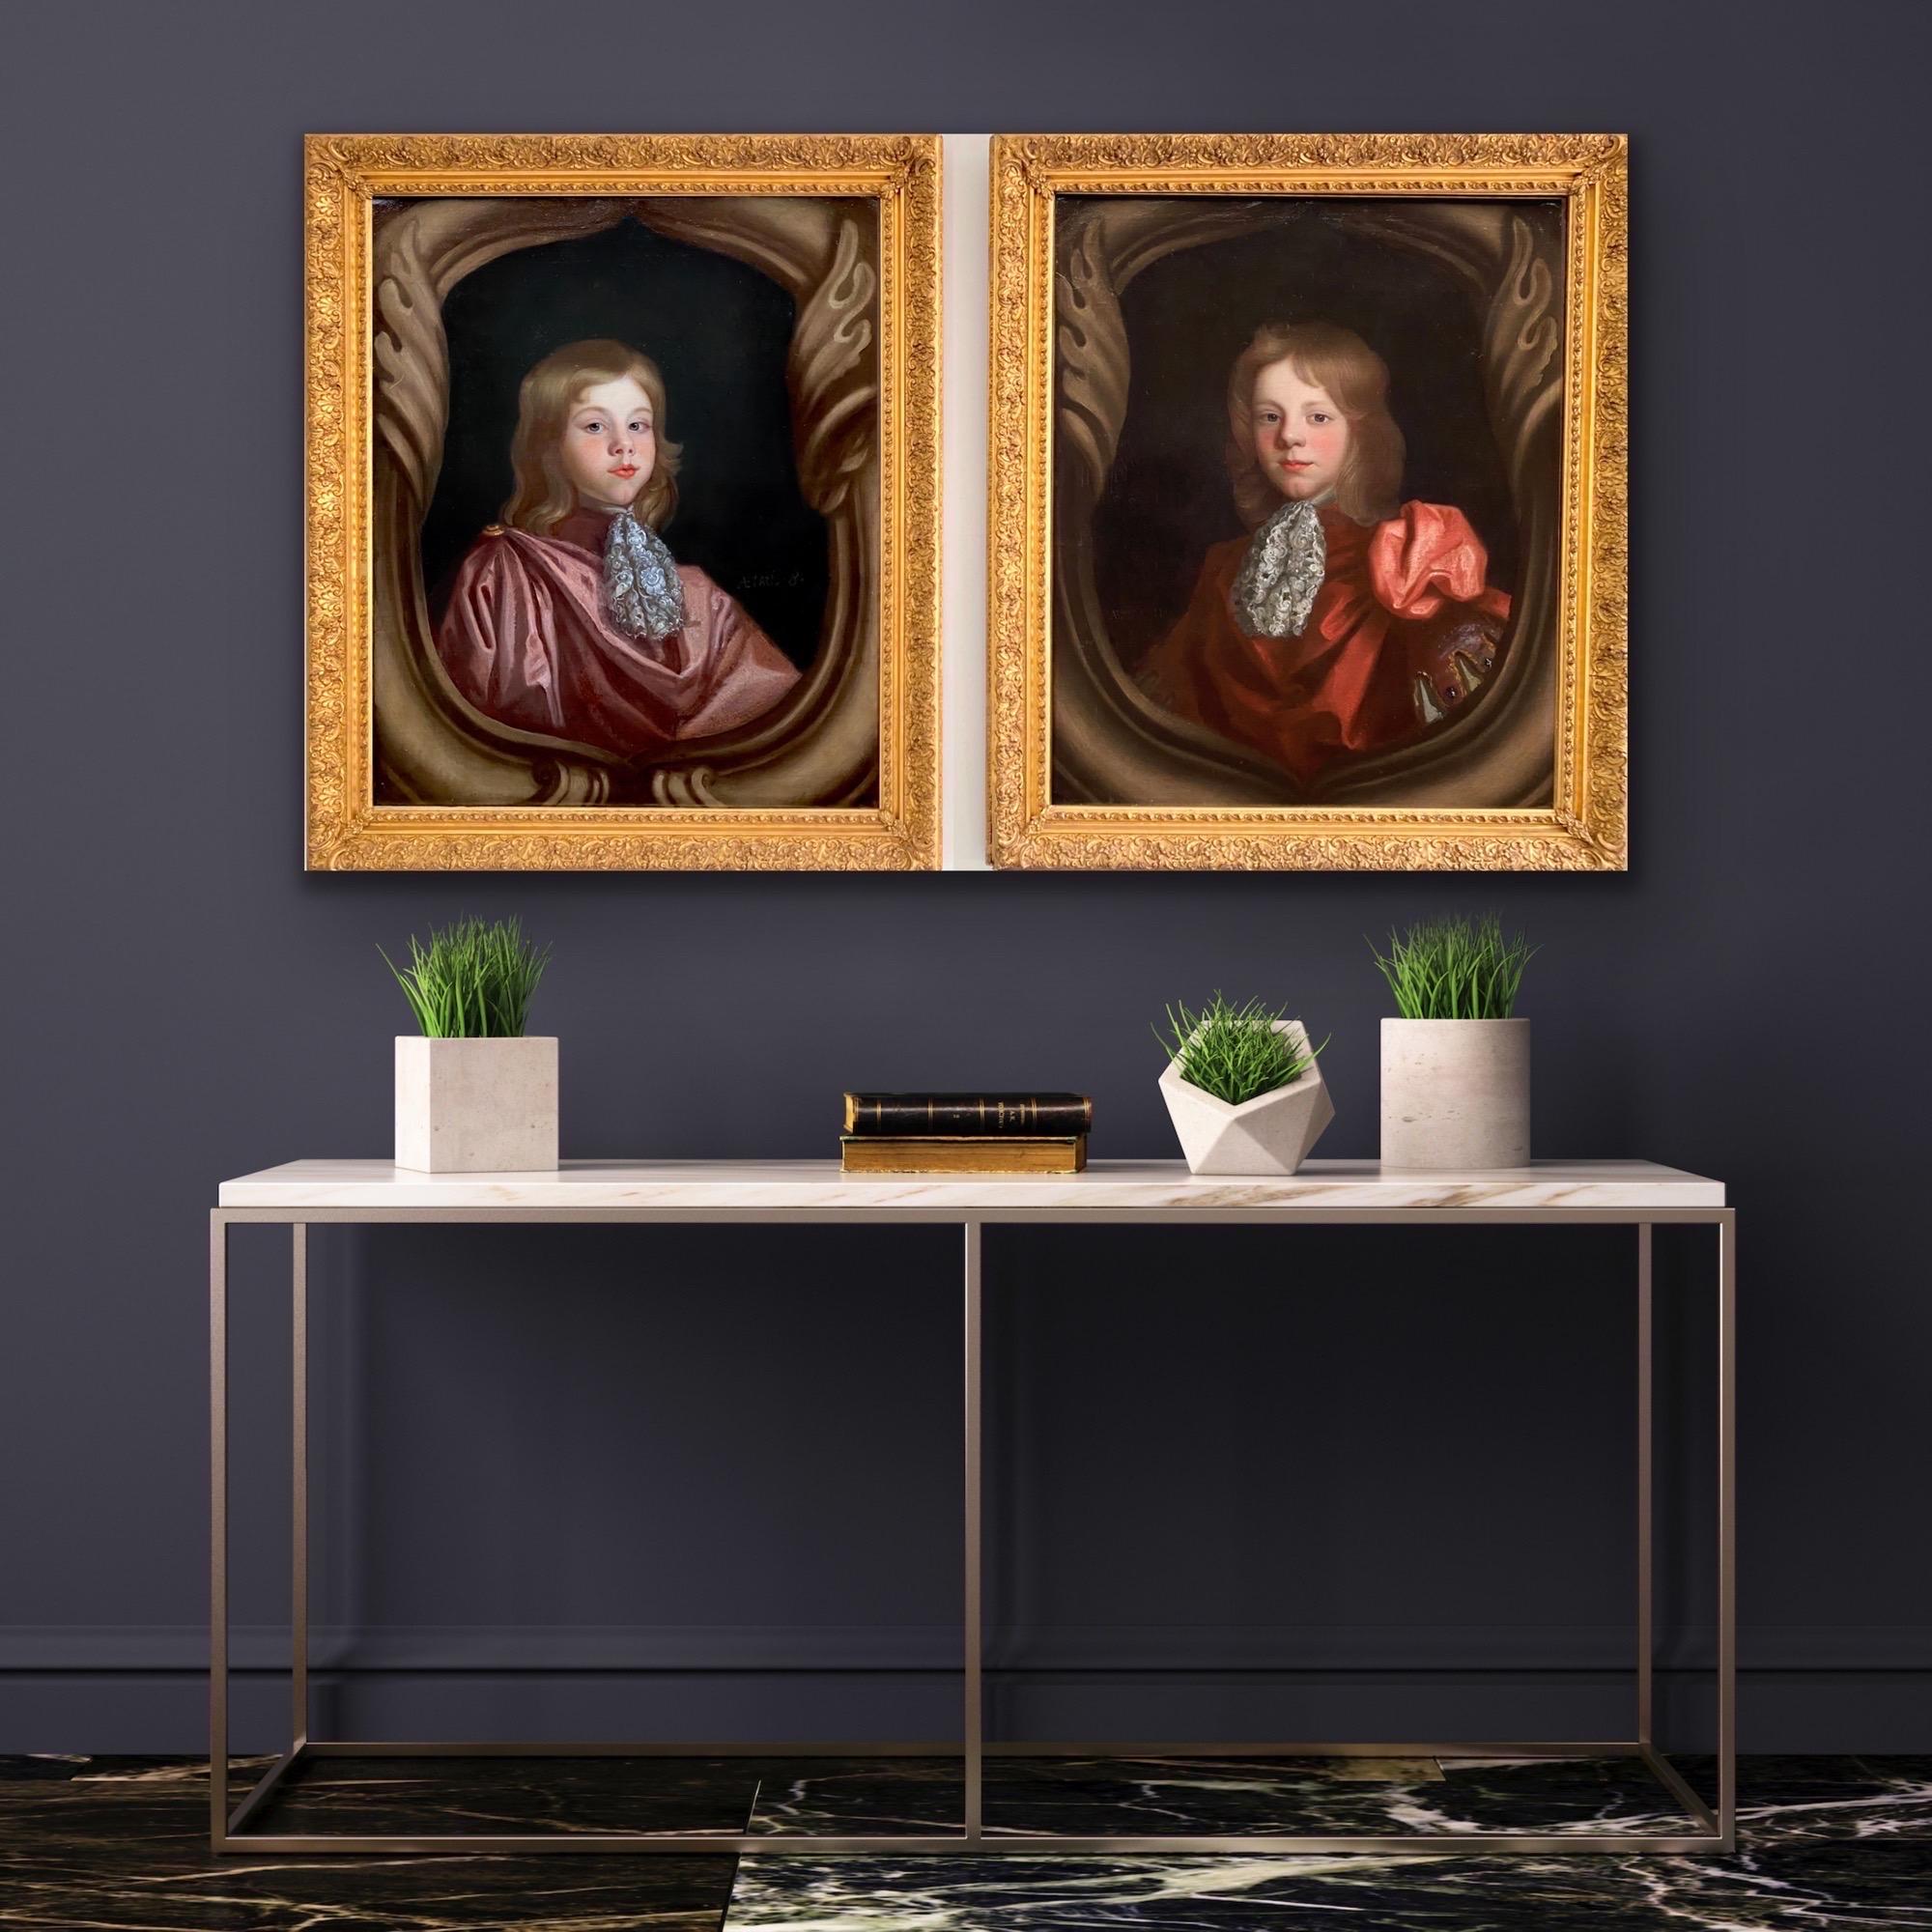 Pair of 17th century British Portraits of the brothers Baronet Stapleton English - Painting by (Circle of) Mary Beale